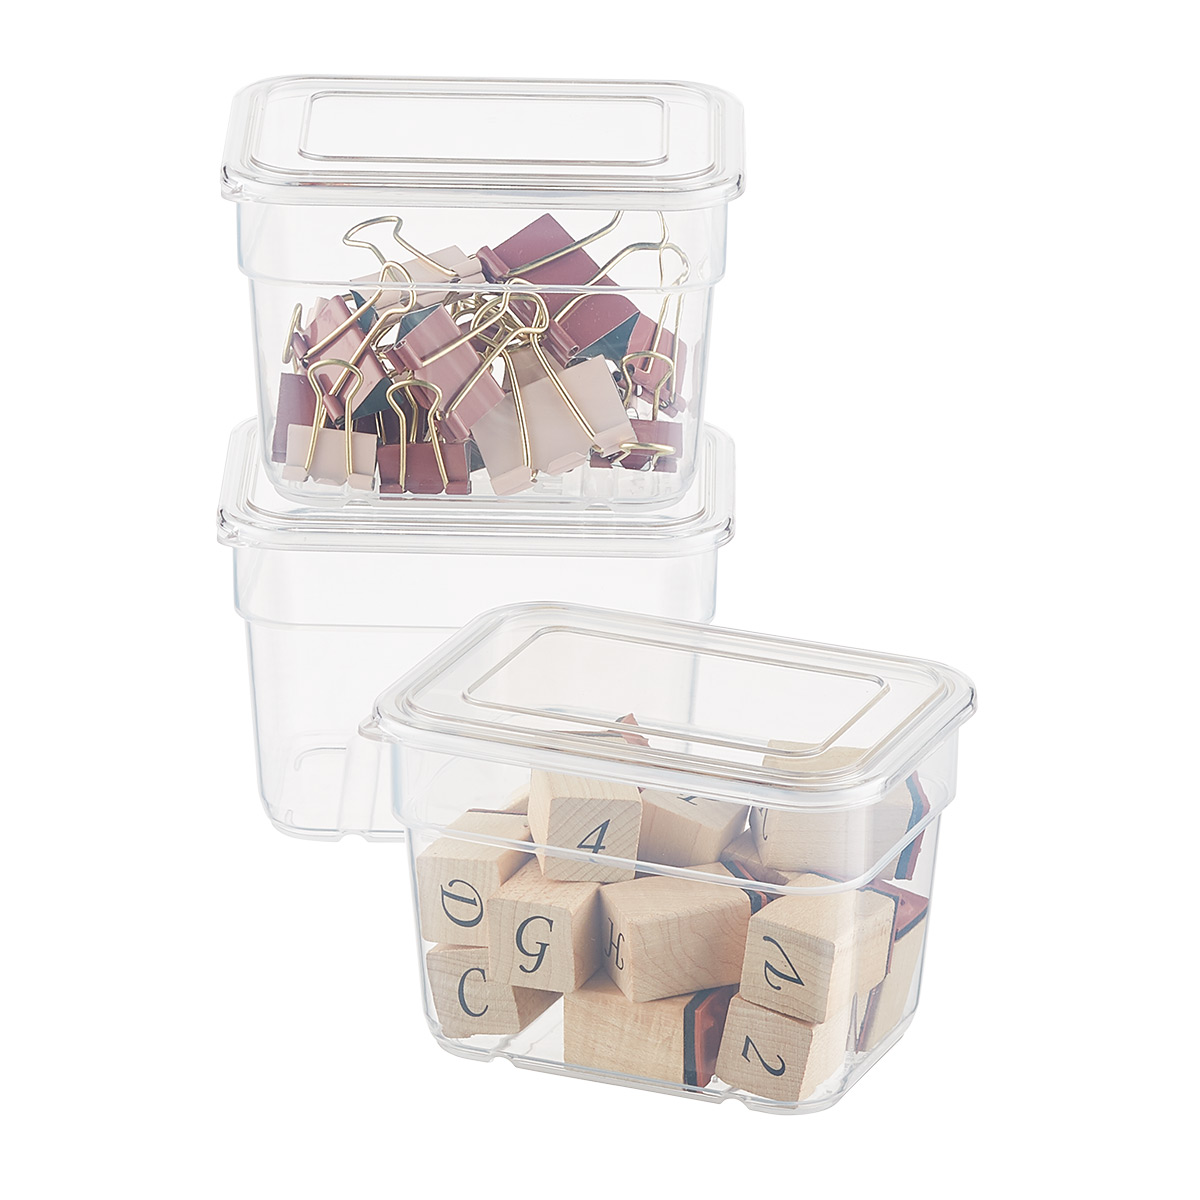 Small ArtBin Storage Bins with Lids | The Container Store